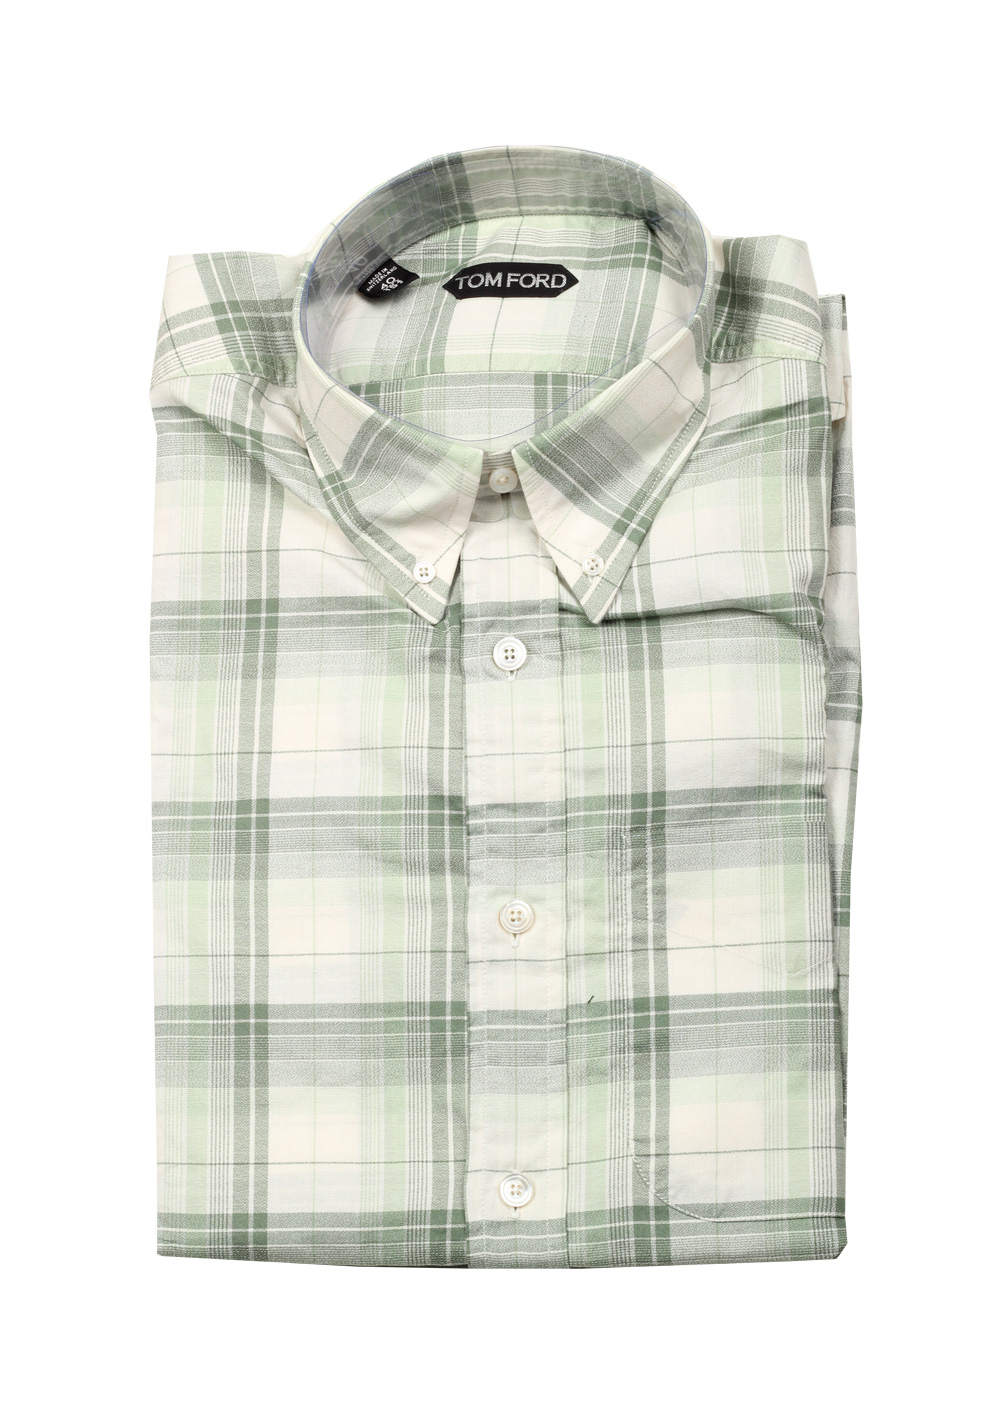 TOM FORD Checked Green Casual Button Down Shirt Size 40 / 15,75 U.S. | Costume Limité